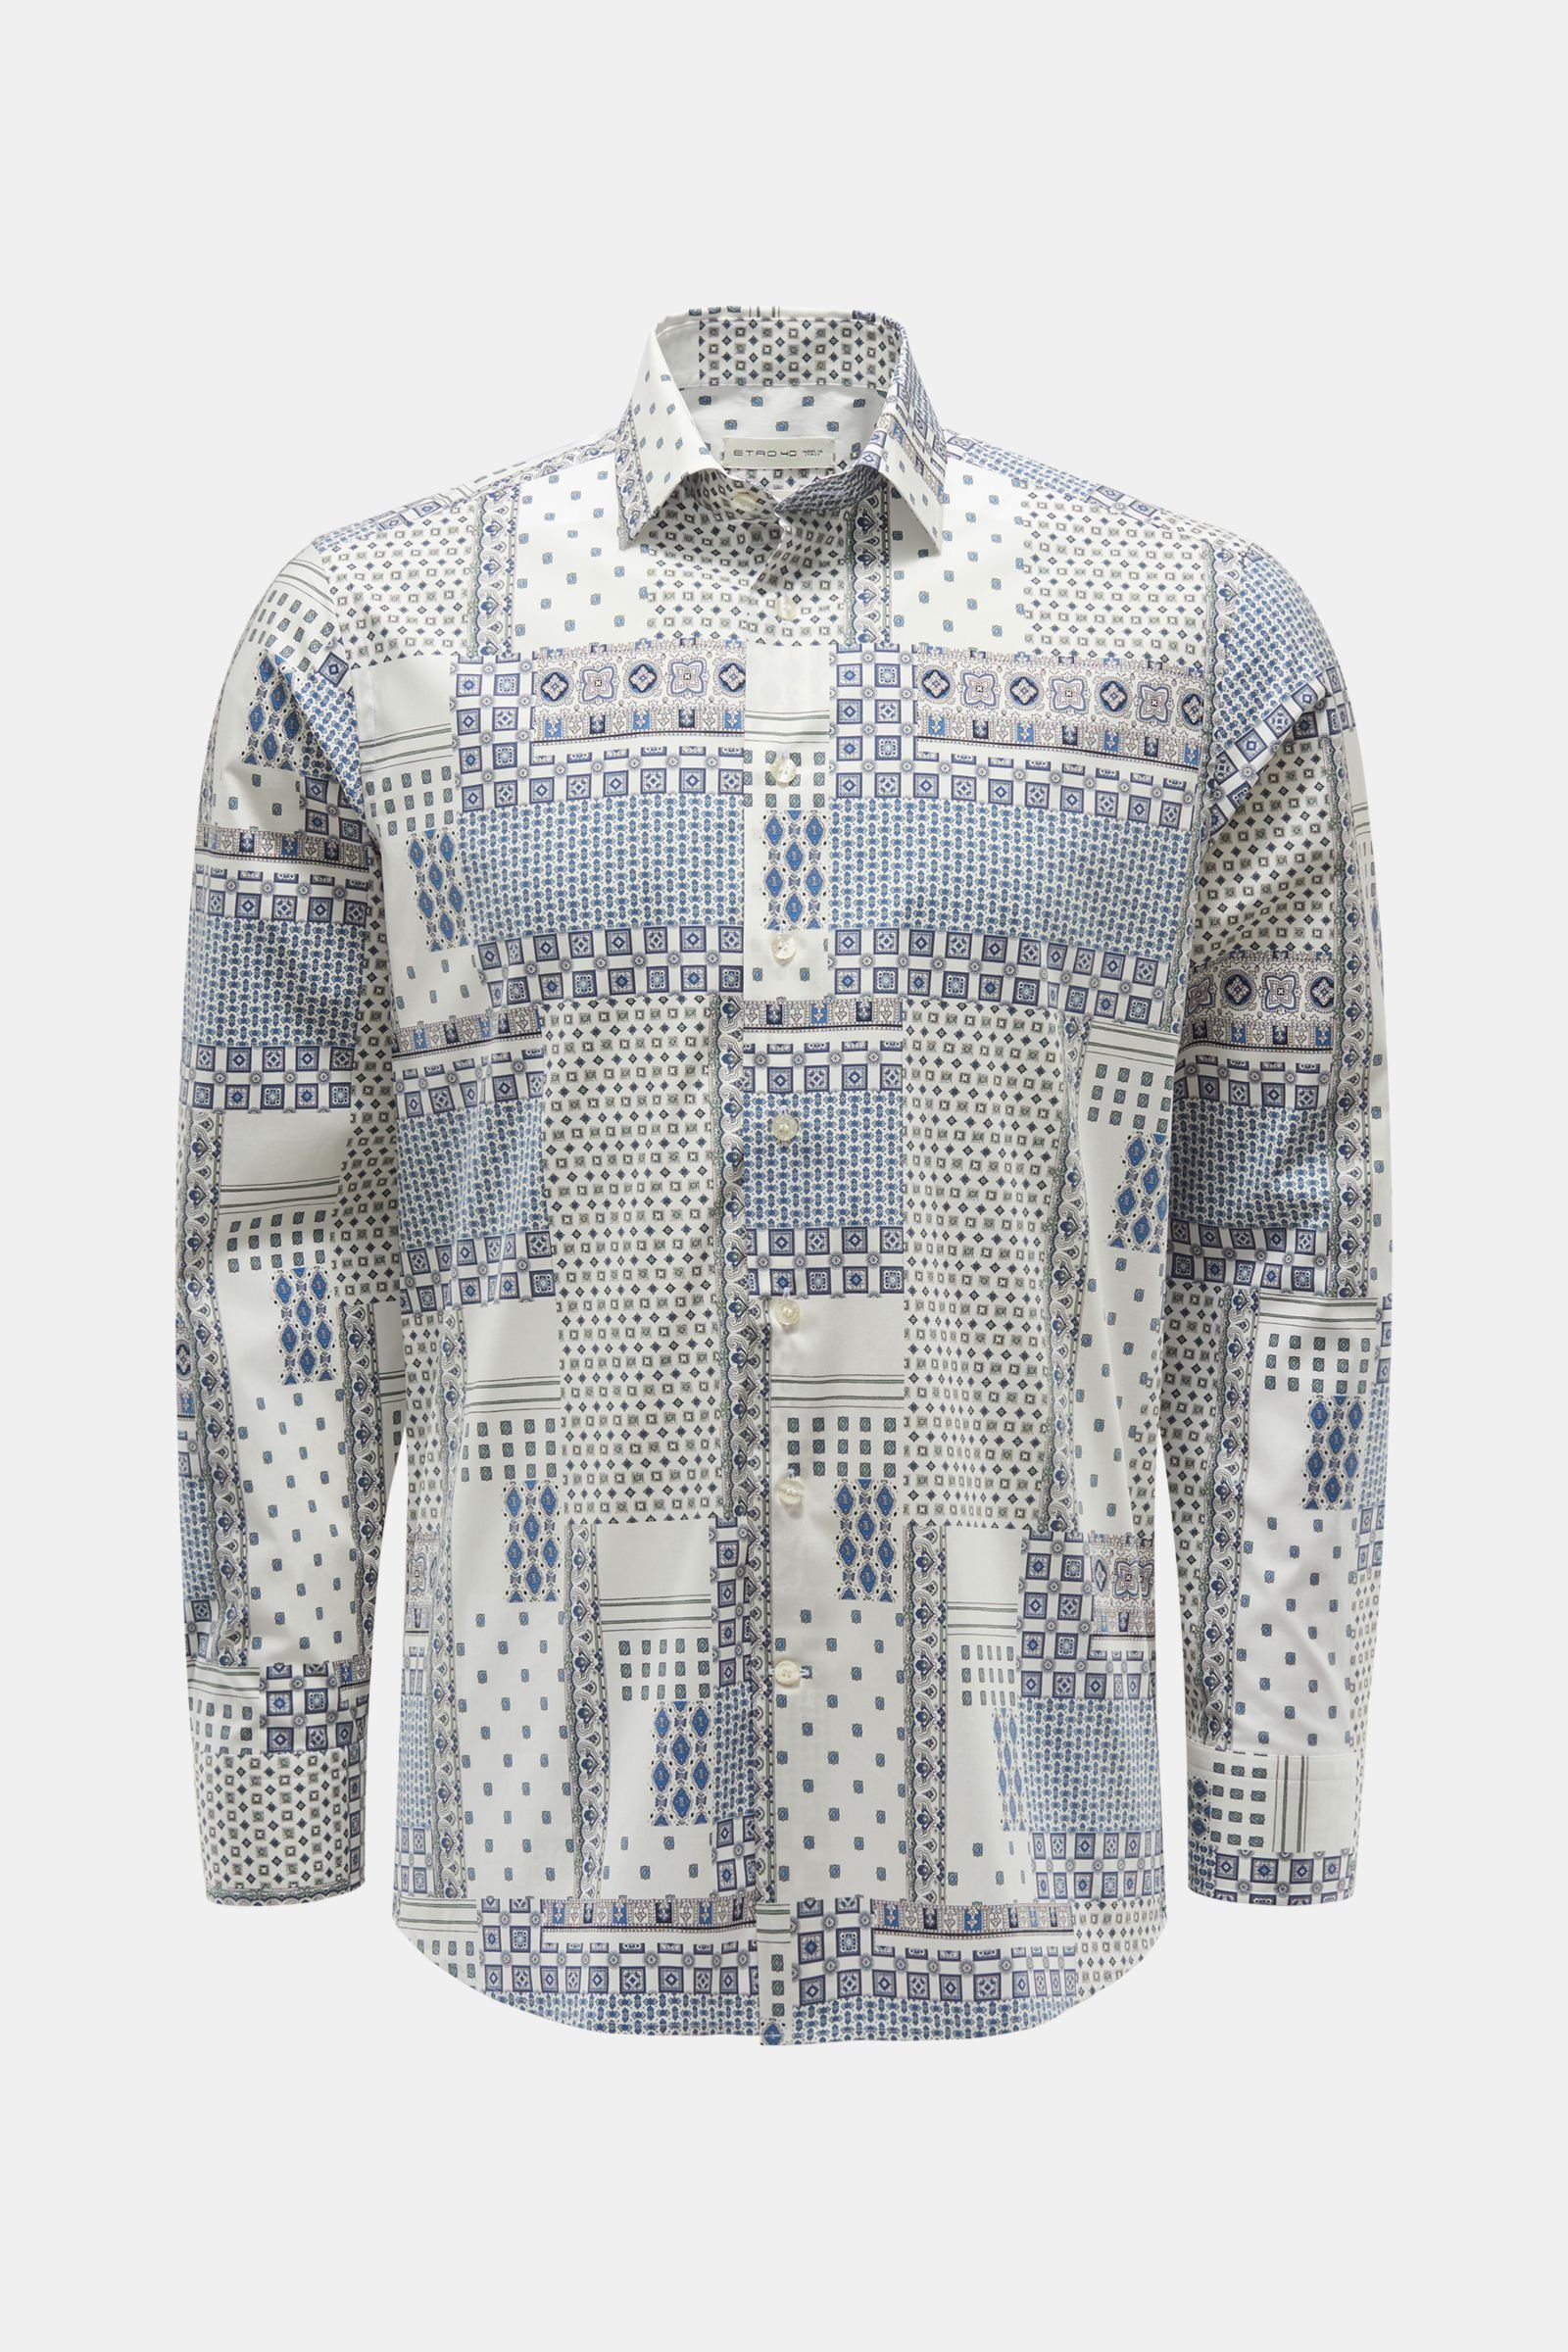 Casual shirt narrow collar white/grey-blue patterned